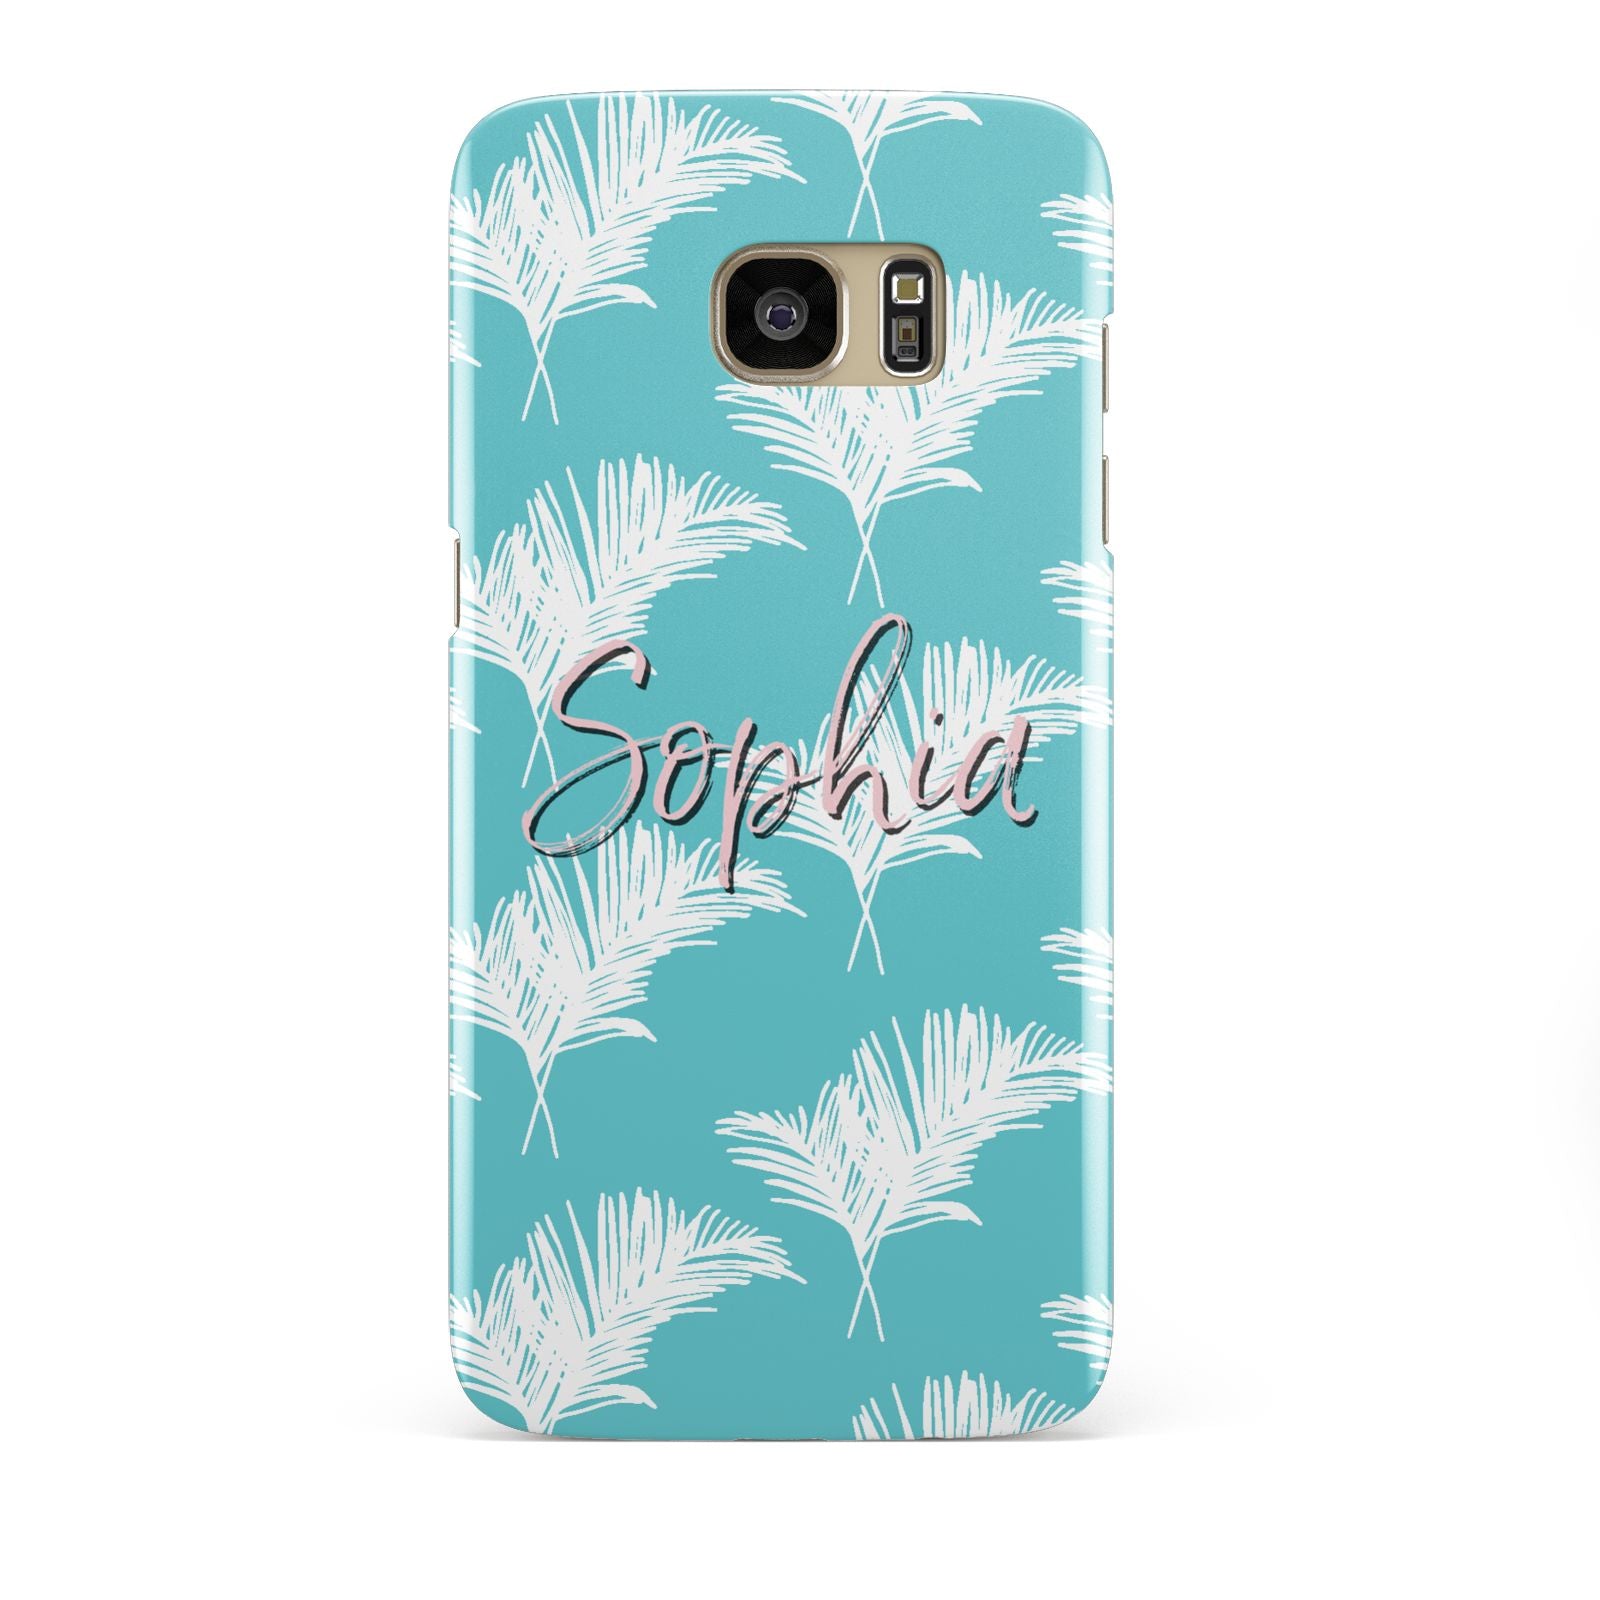 Personalised Blue White Tropical Foliage Samsung Galaxy S7 Edge Case